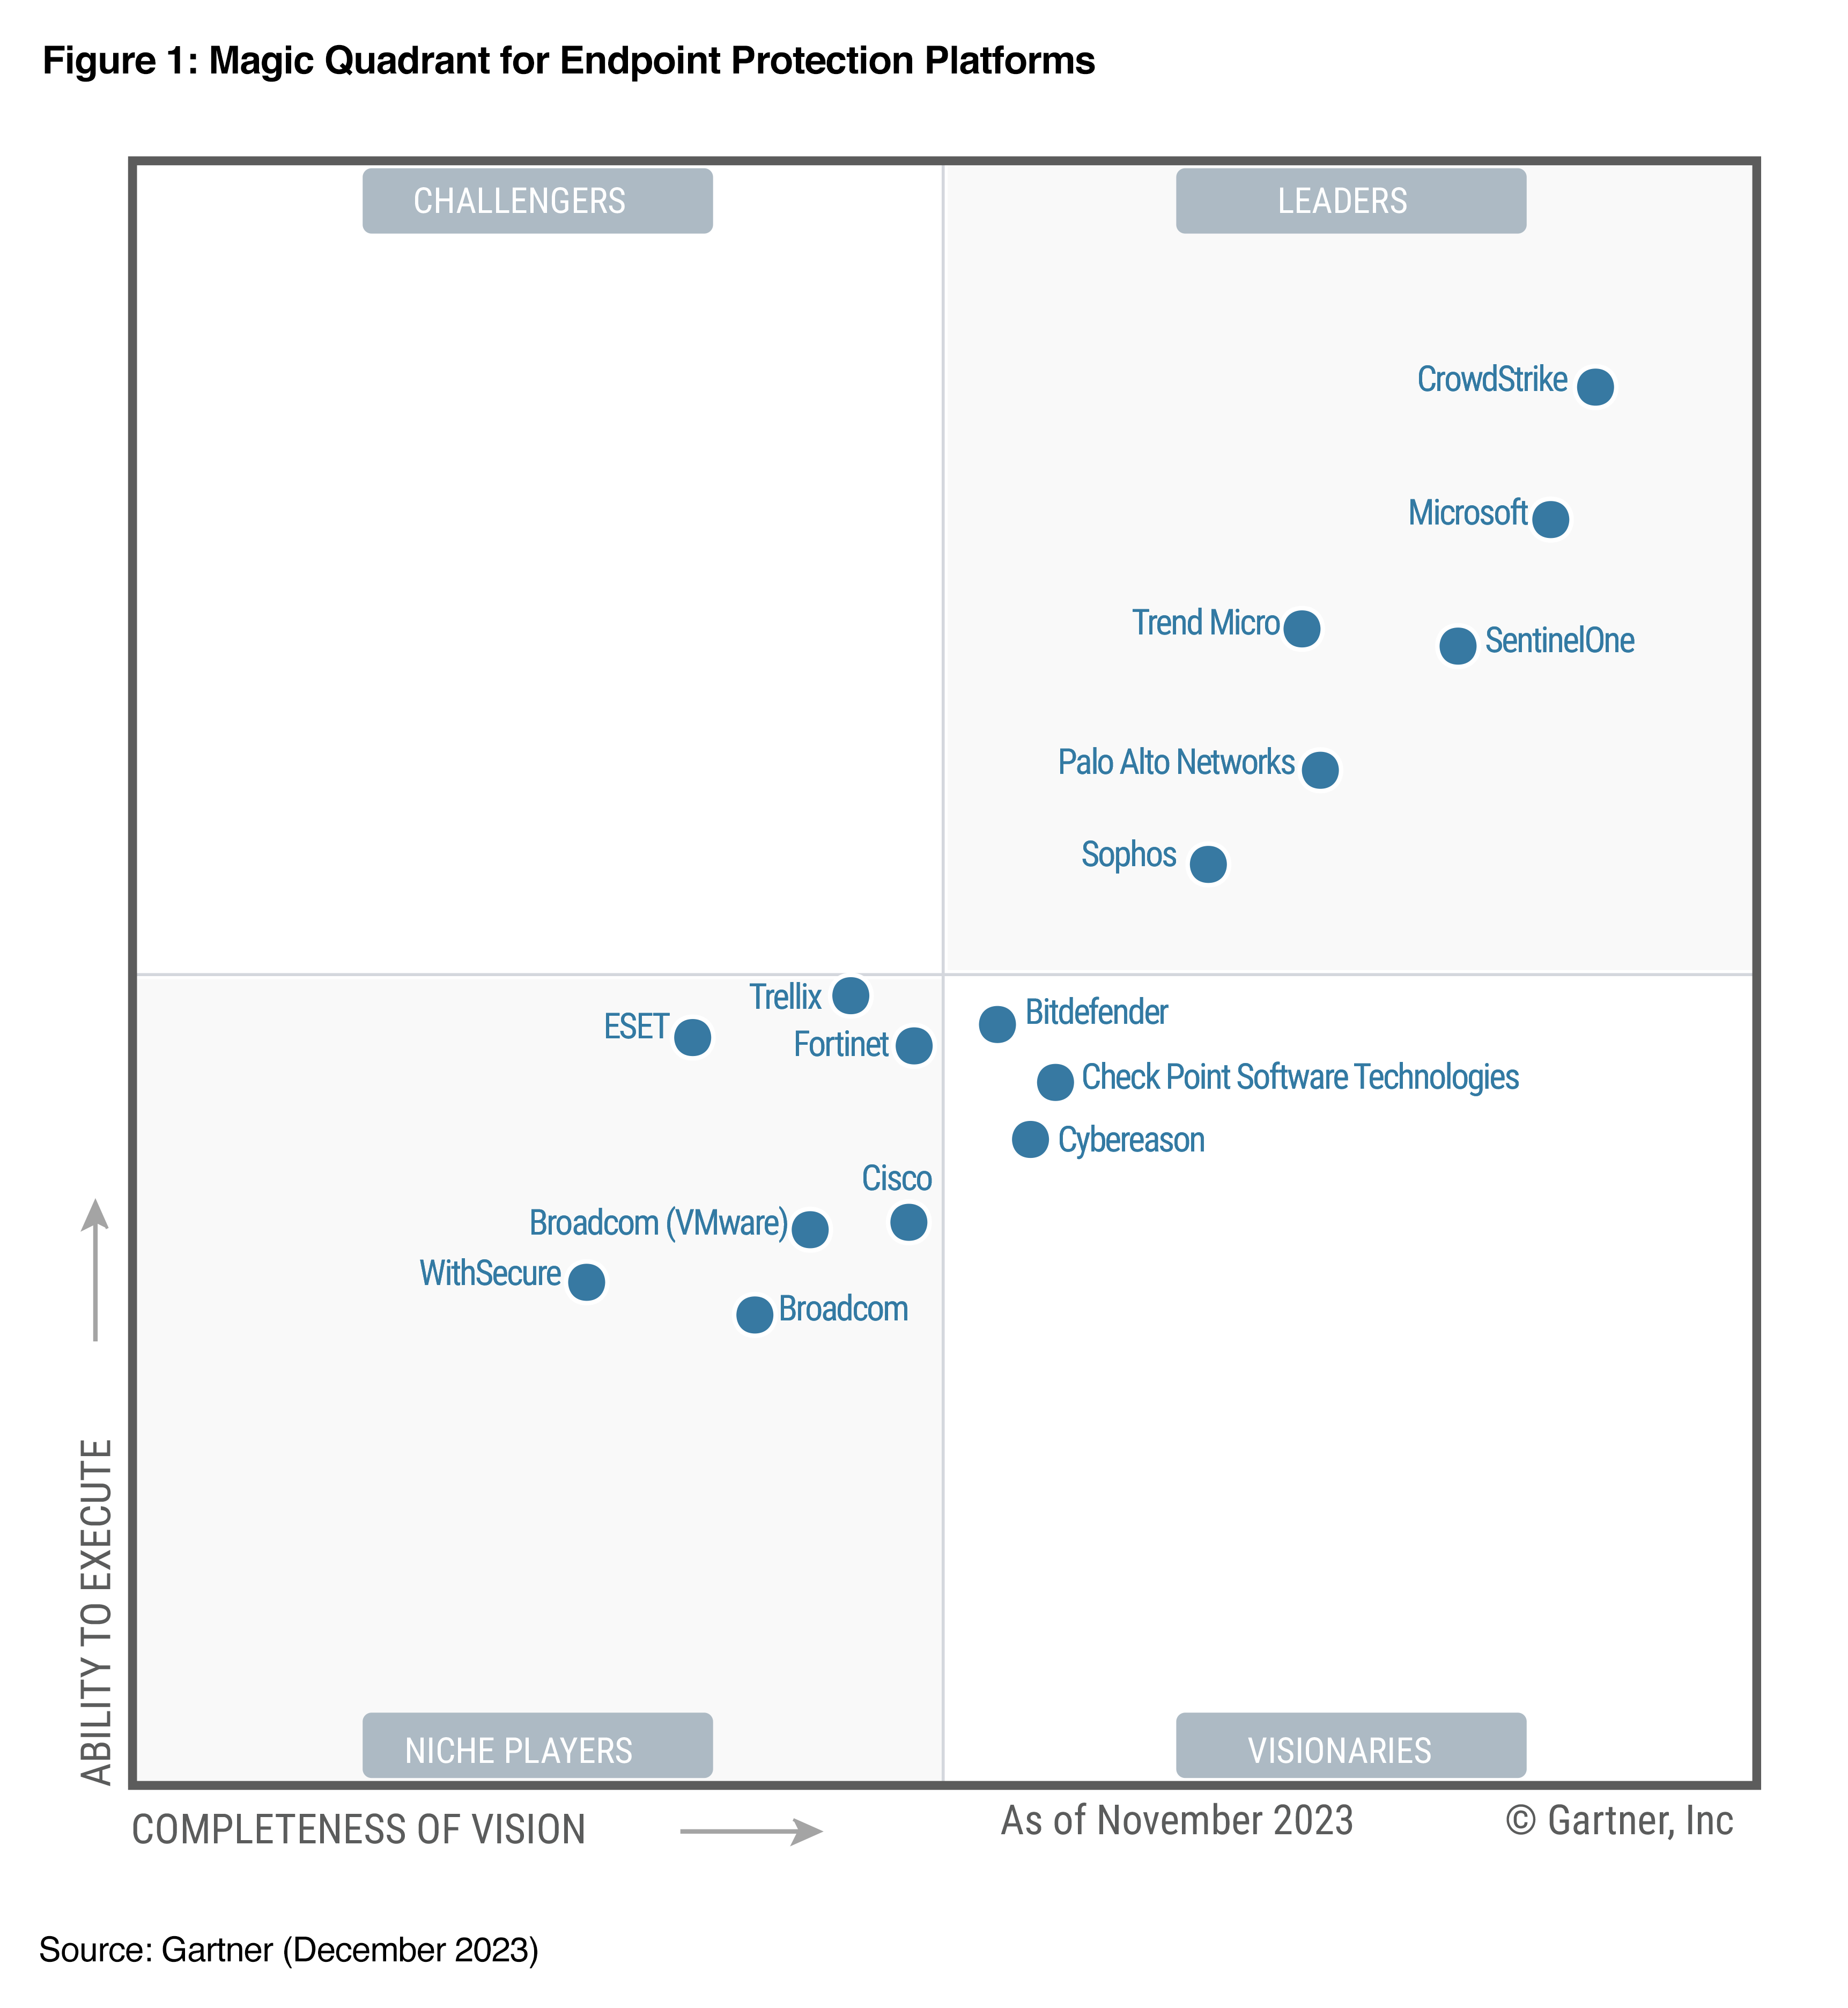 Palo Alto Networks Recognized as a Leader in the 2023 Gartner Magic Quadrant for Endpoint